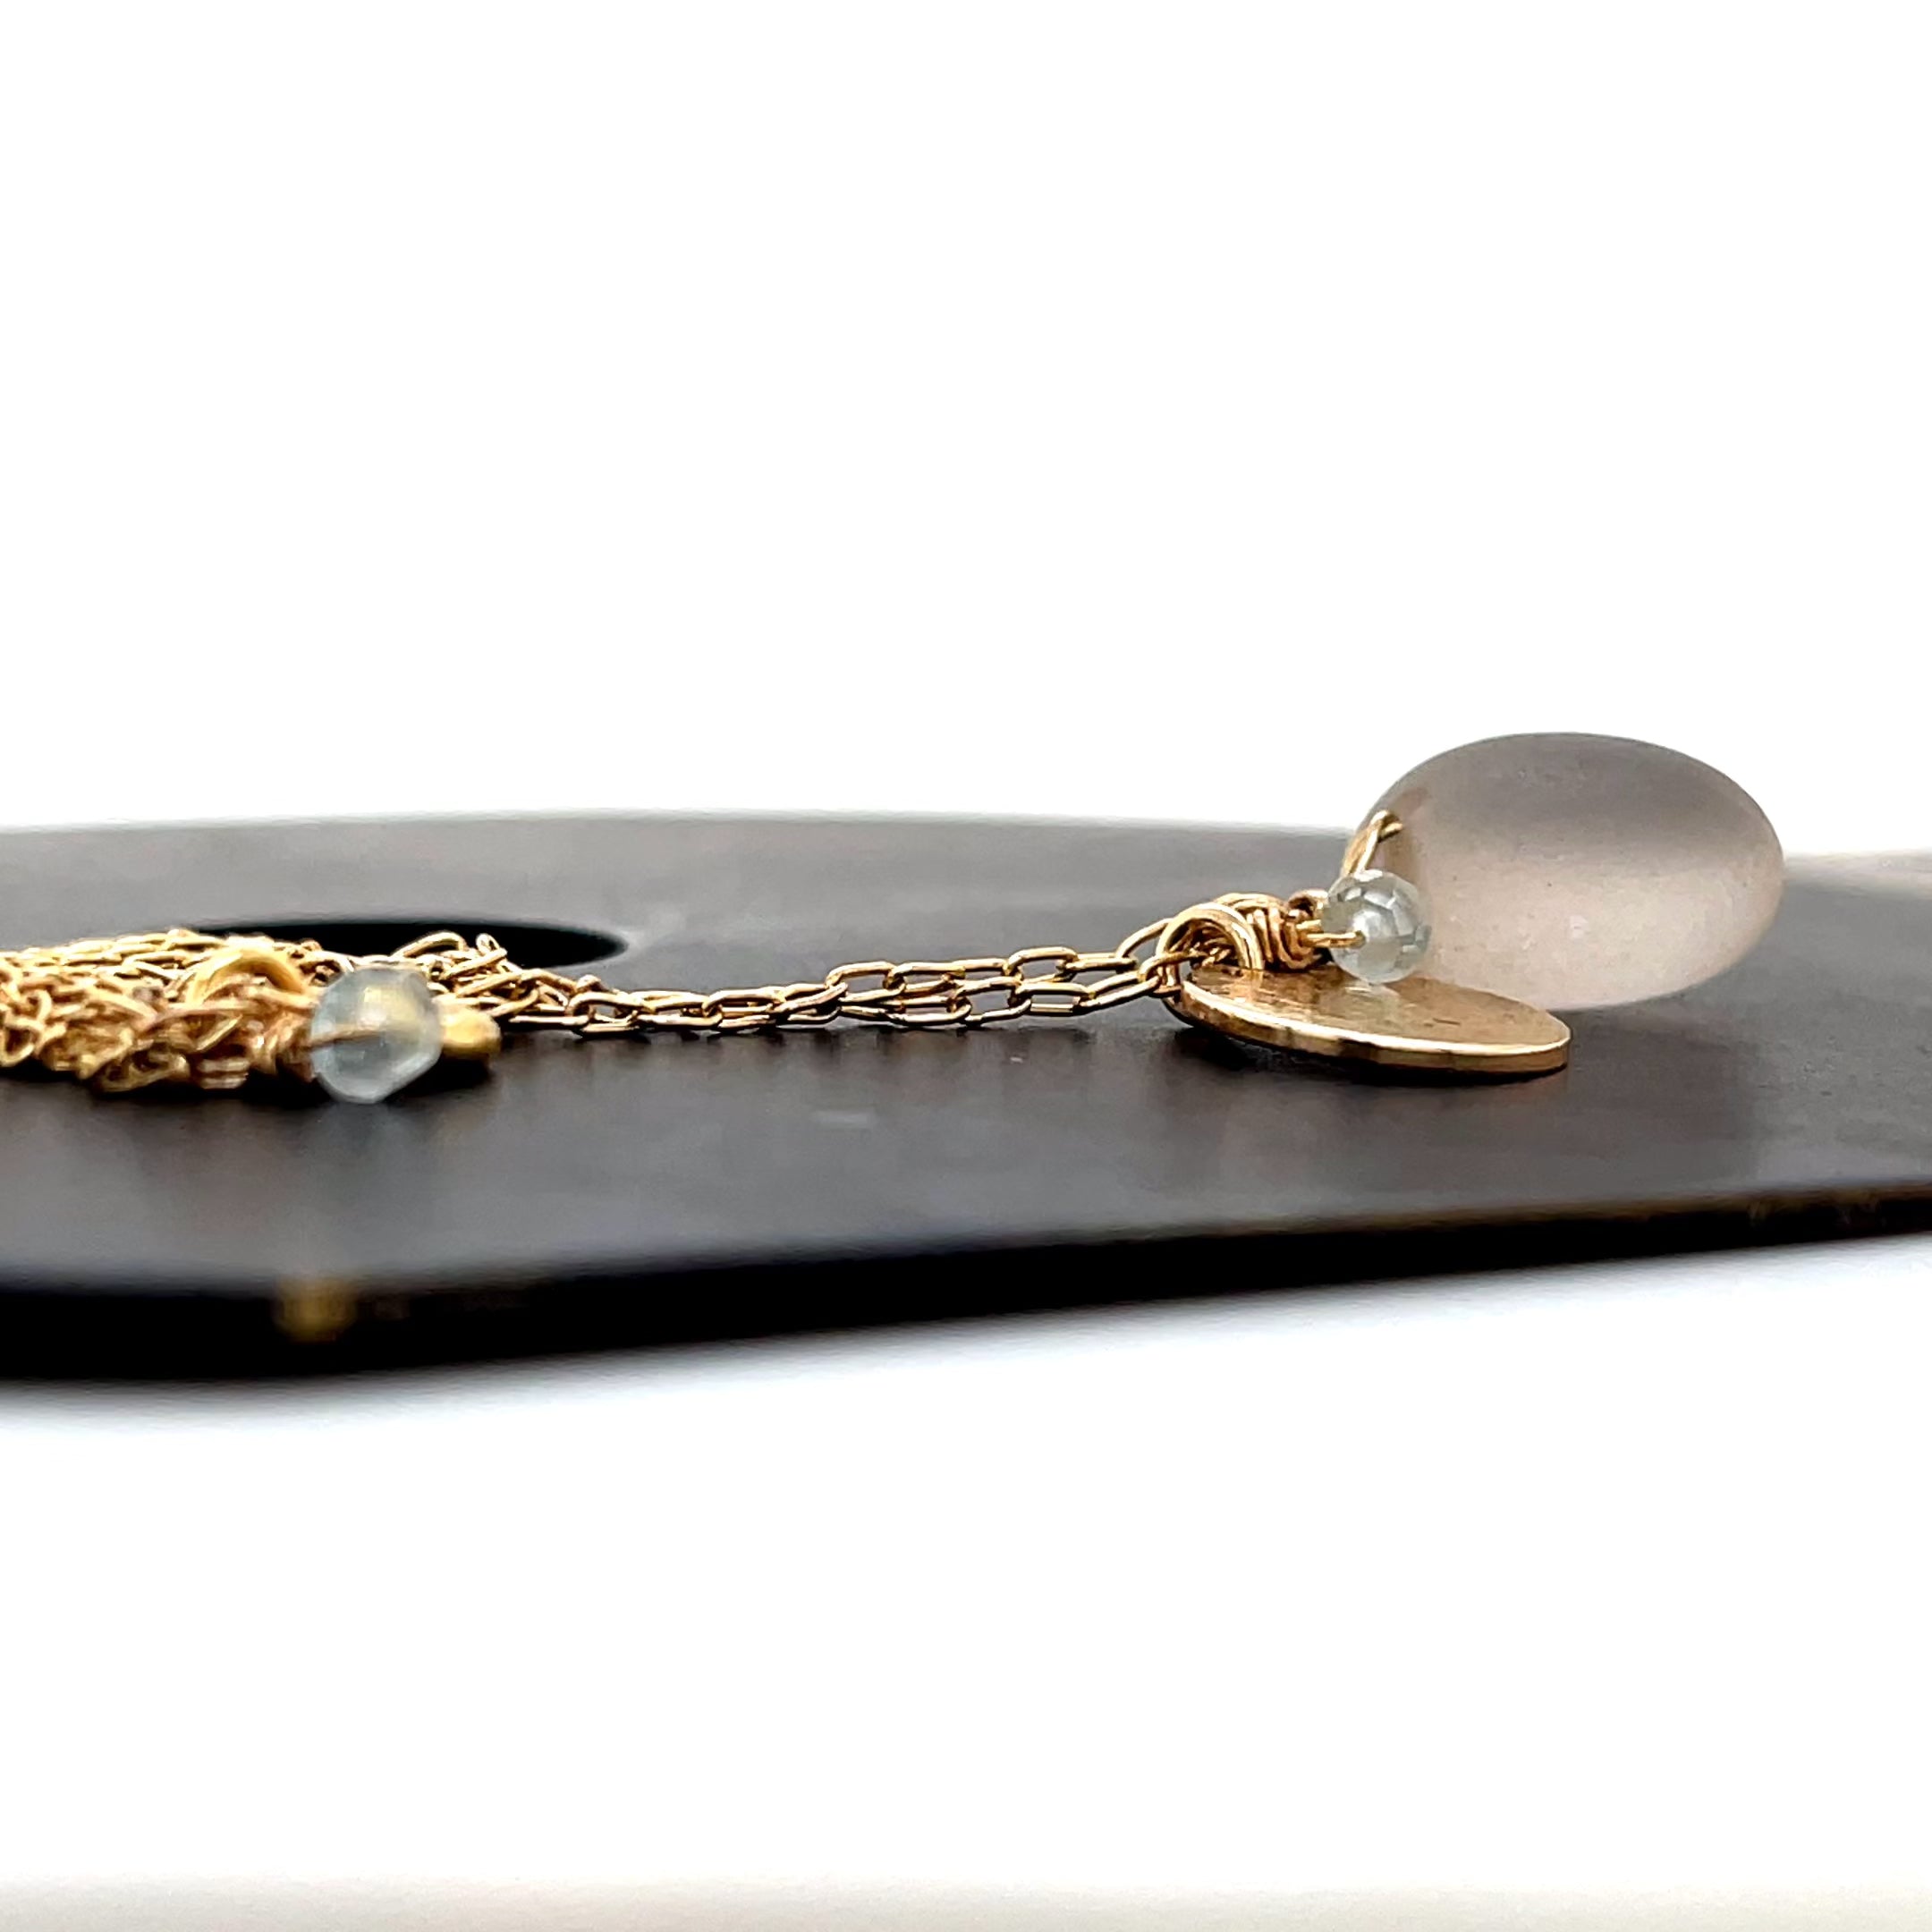 made in australia, gold necklace online